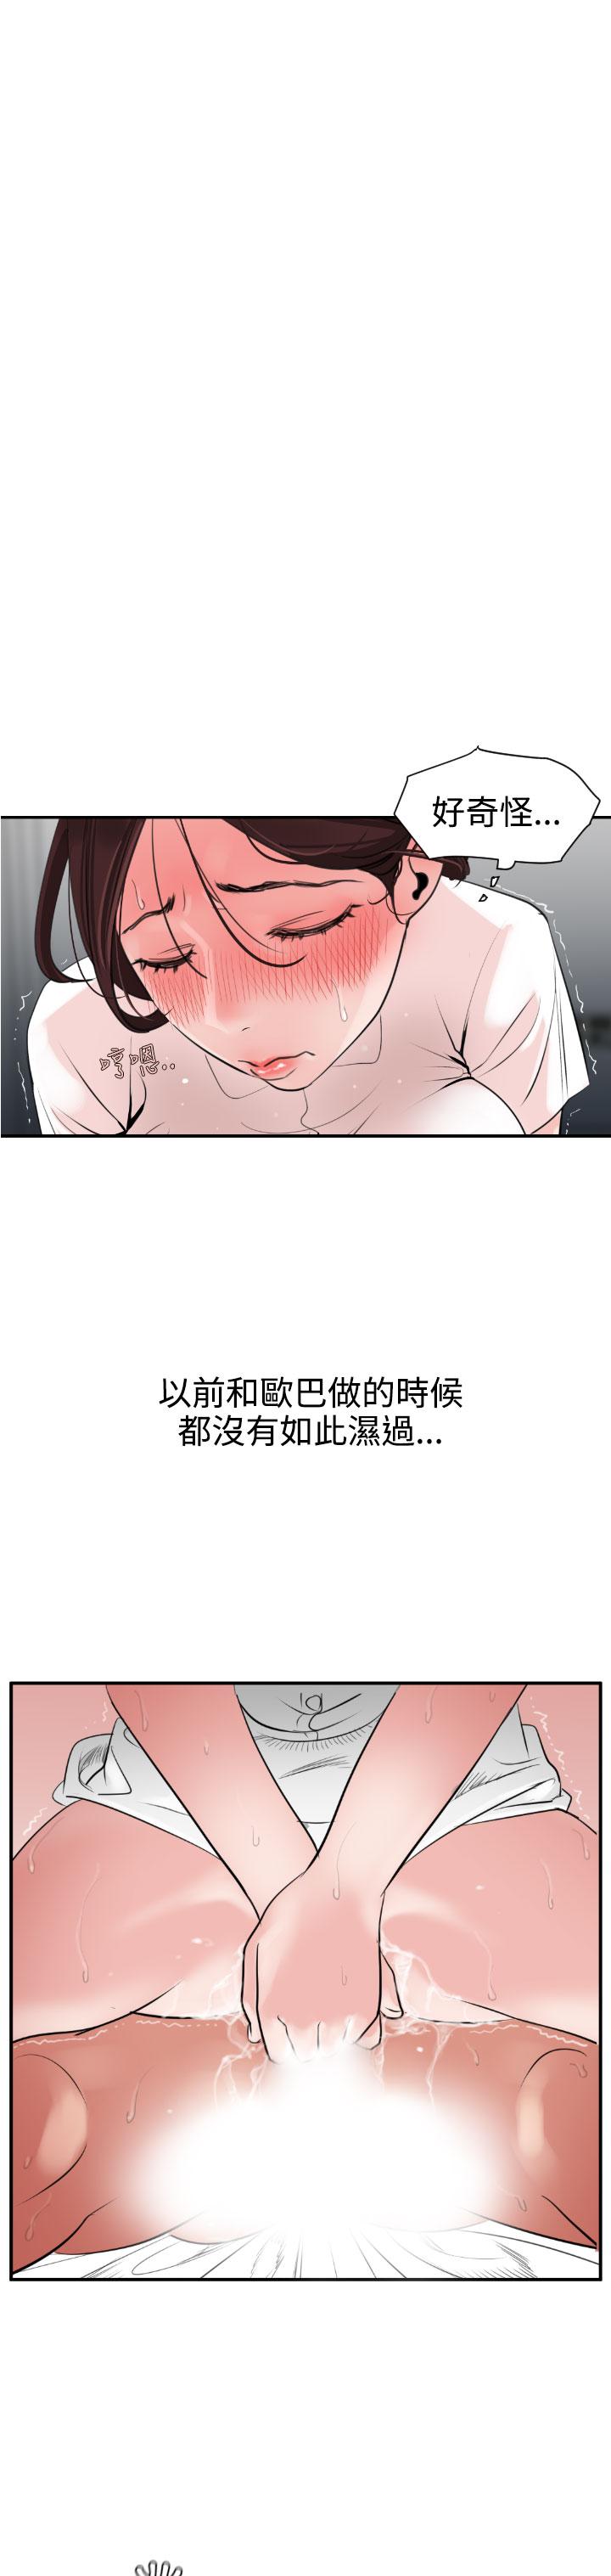 Desire King (慾求王) Ch.1-7 (chinese) 140